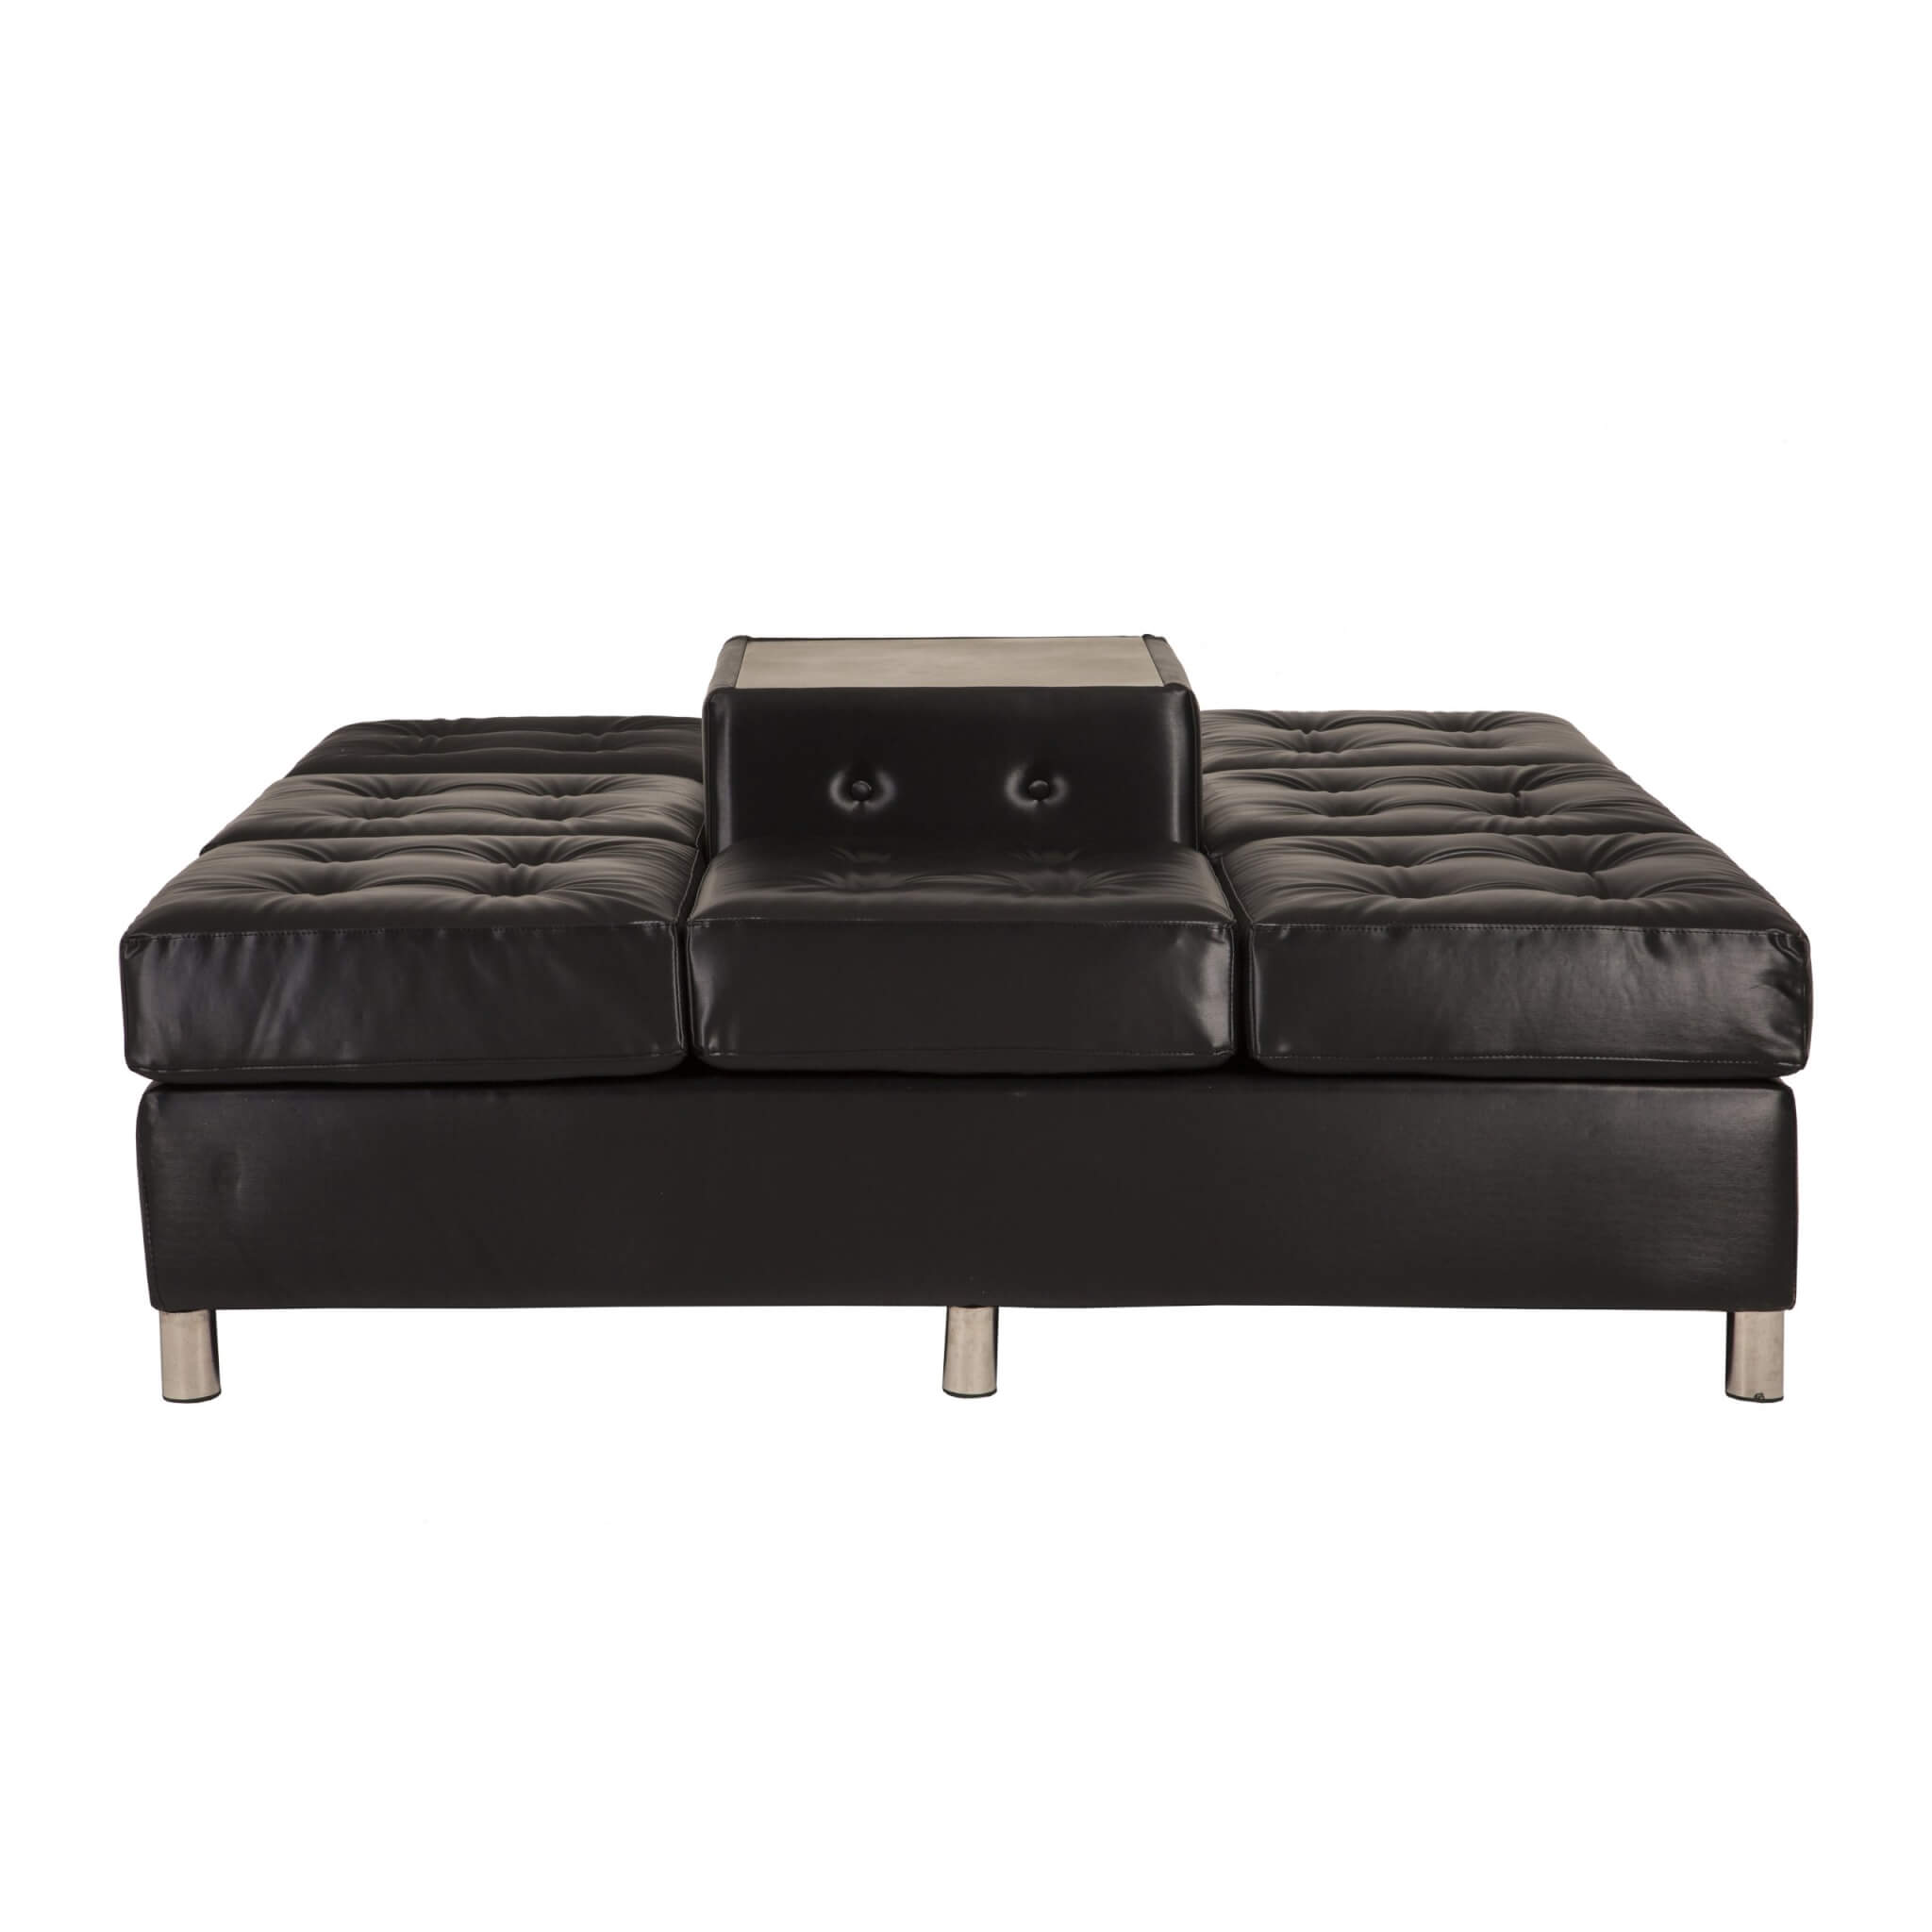 Lillian Eight Seater Gallery Daybed – Black Leather Look – 150cmW x 45cmH